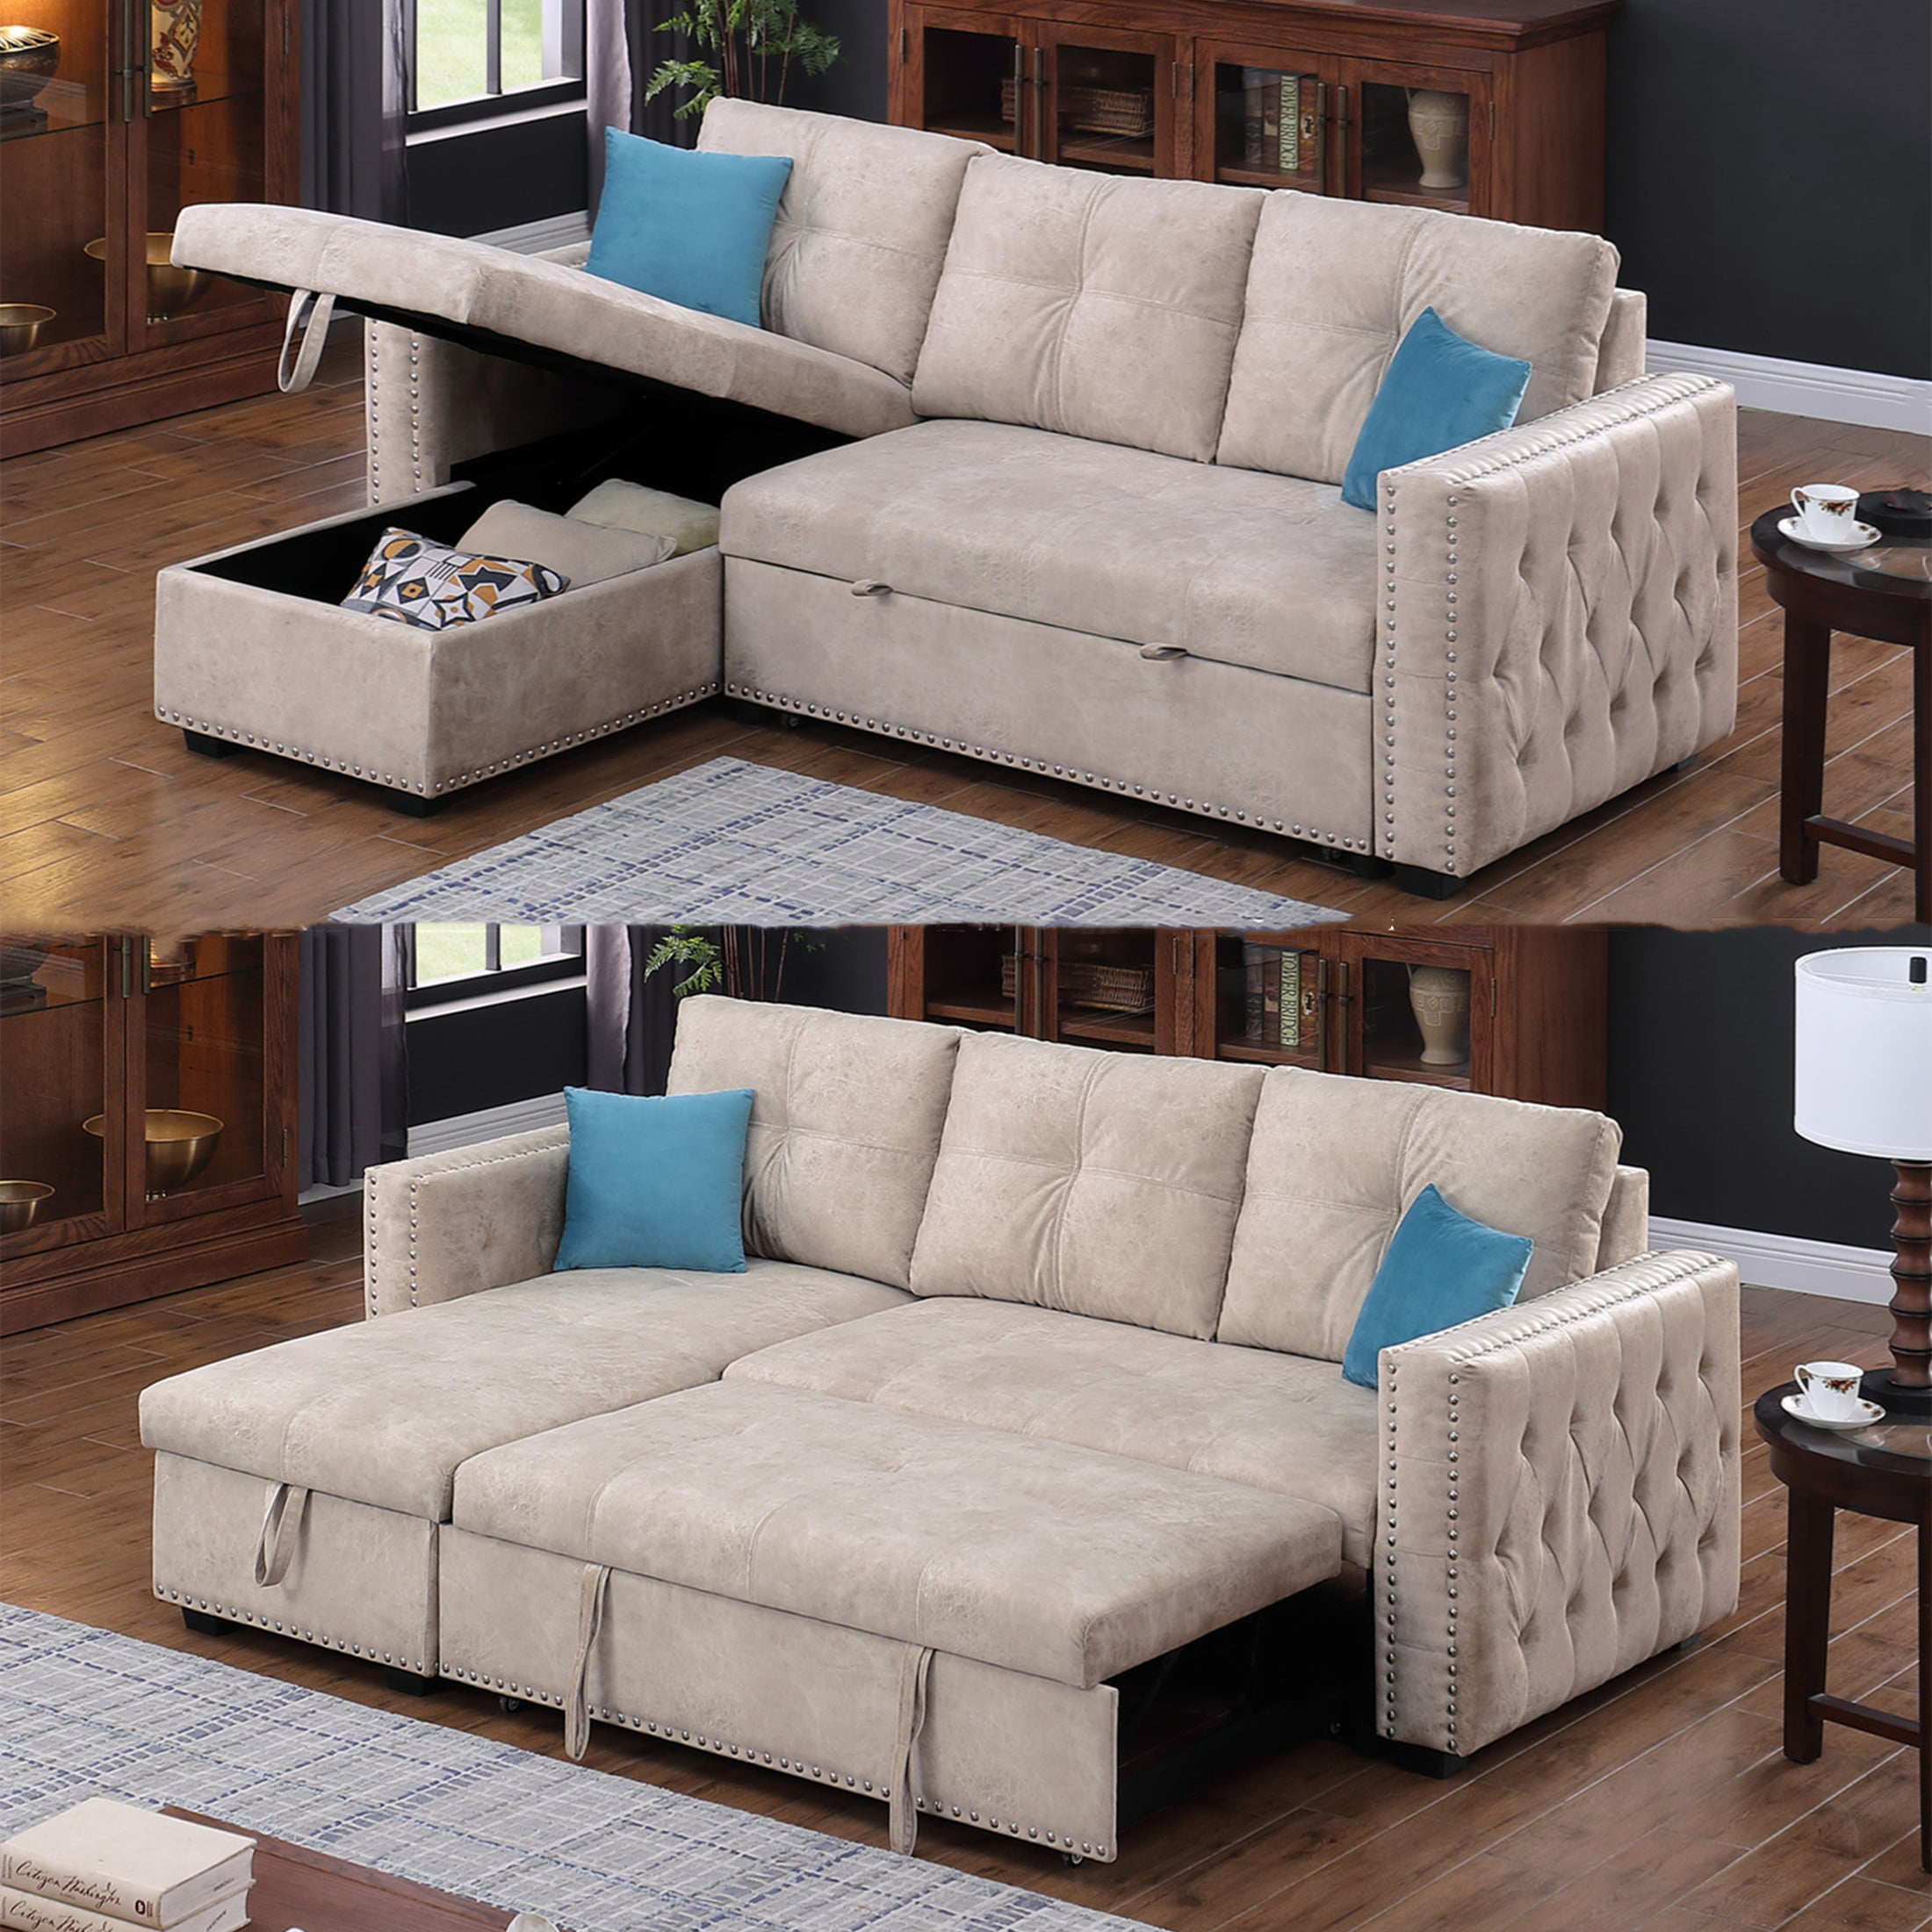 Aukfa 91″ Sectional Sleeper Sofa, Pull Out Bed with Storage Chaise